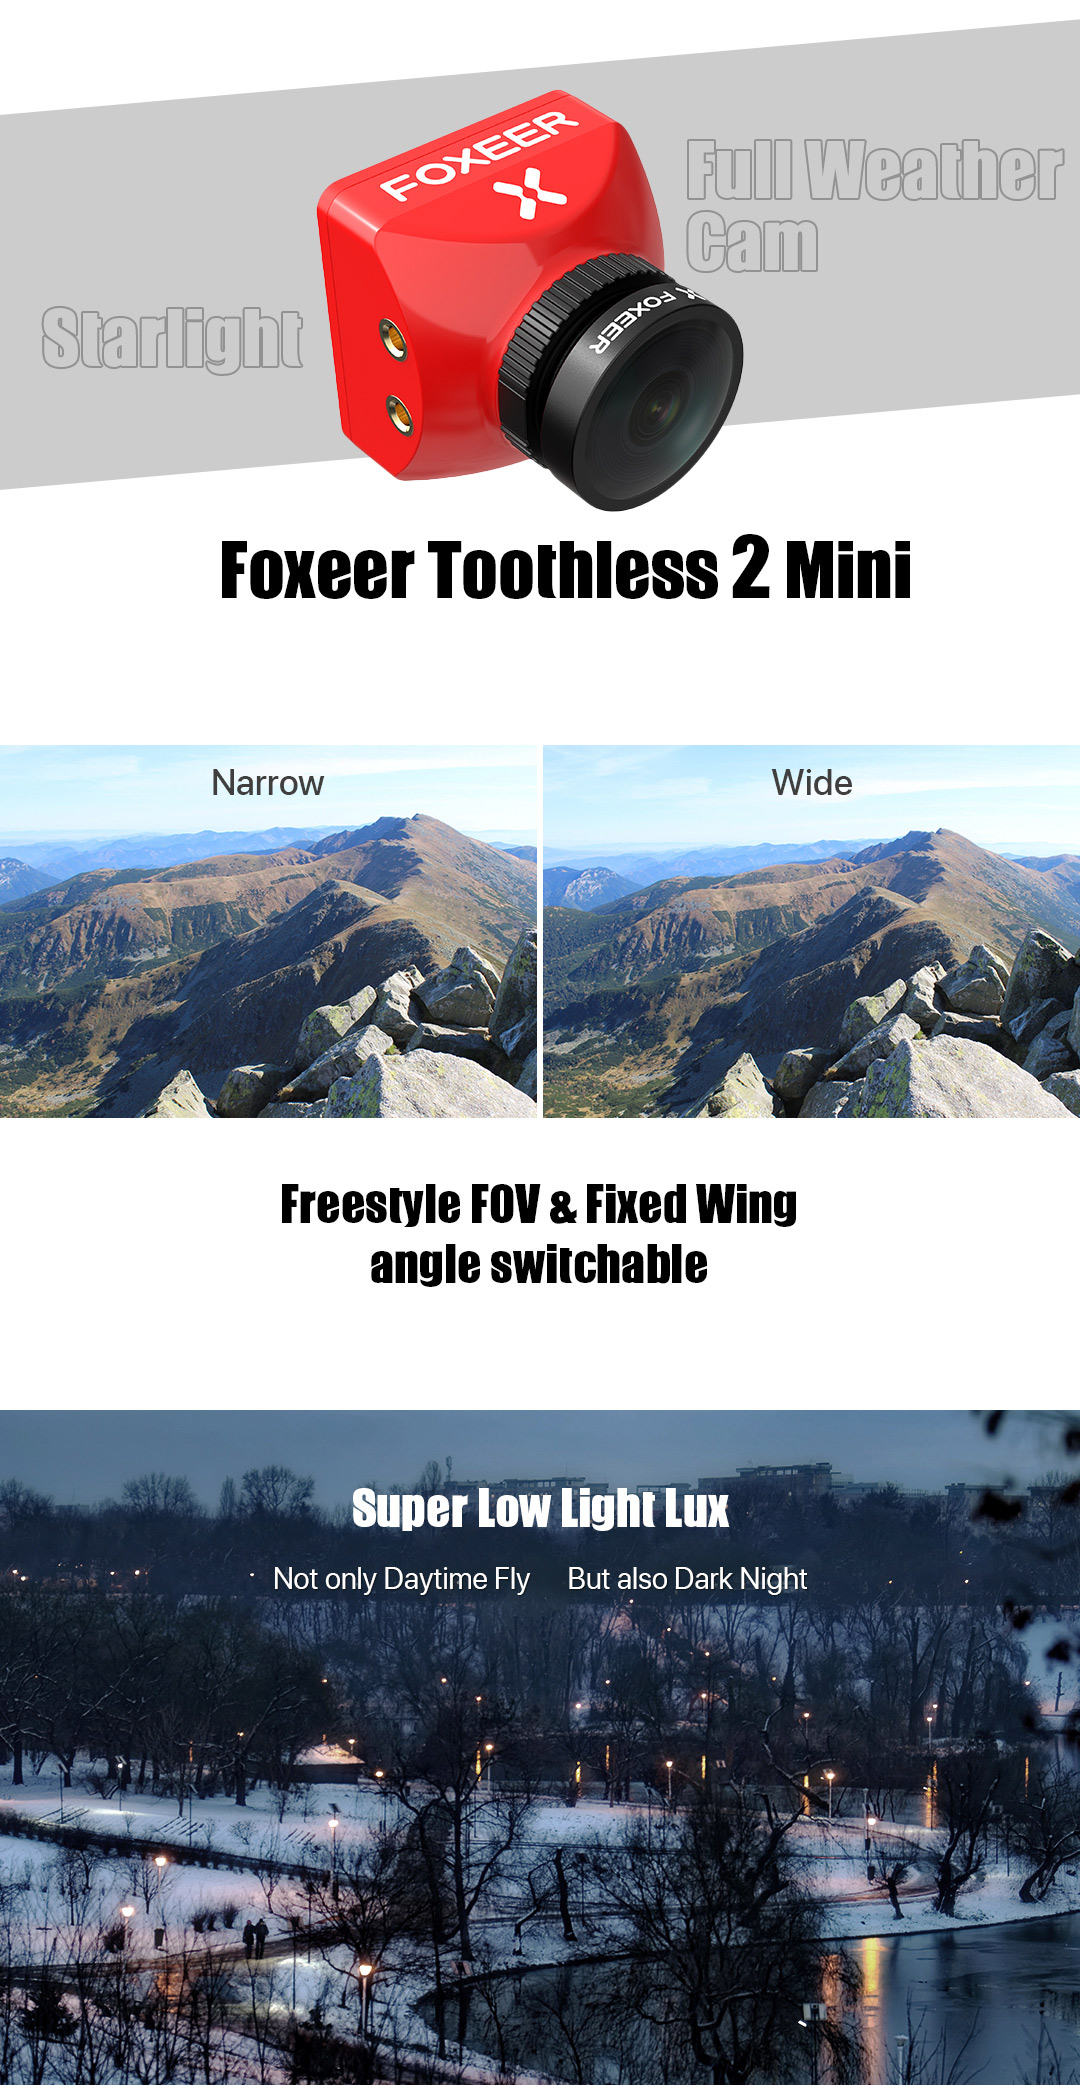 Foxeer Mini Toothless 2 FPV Camera (Pick Your Color) 9 - Foxeer